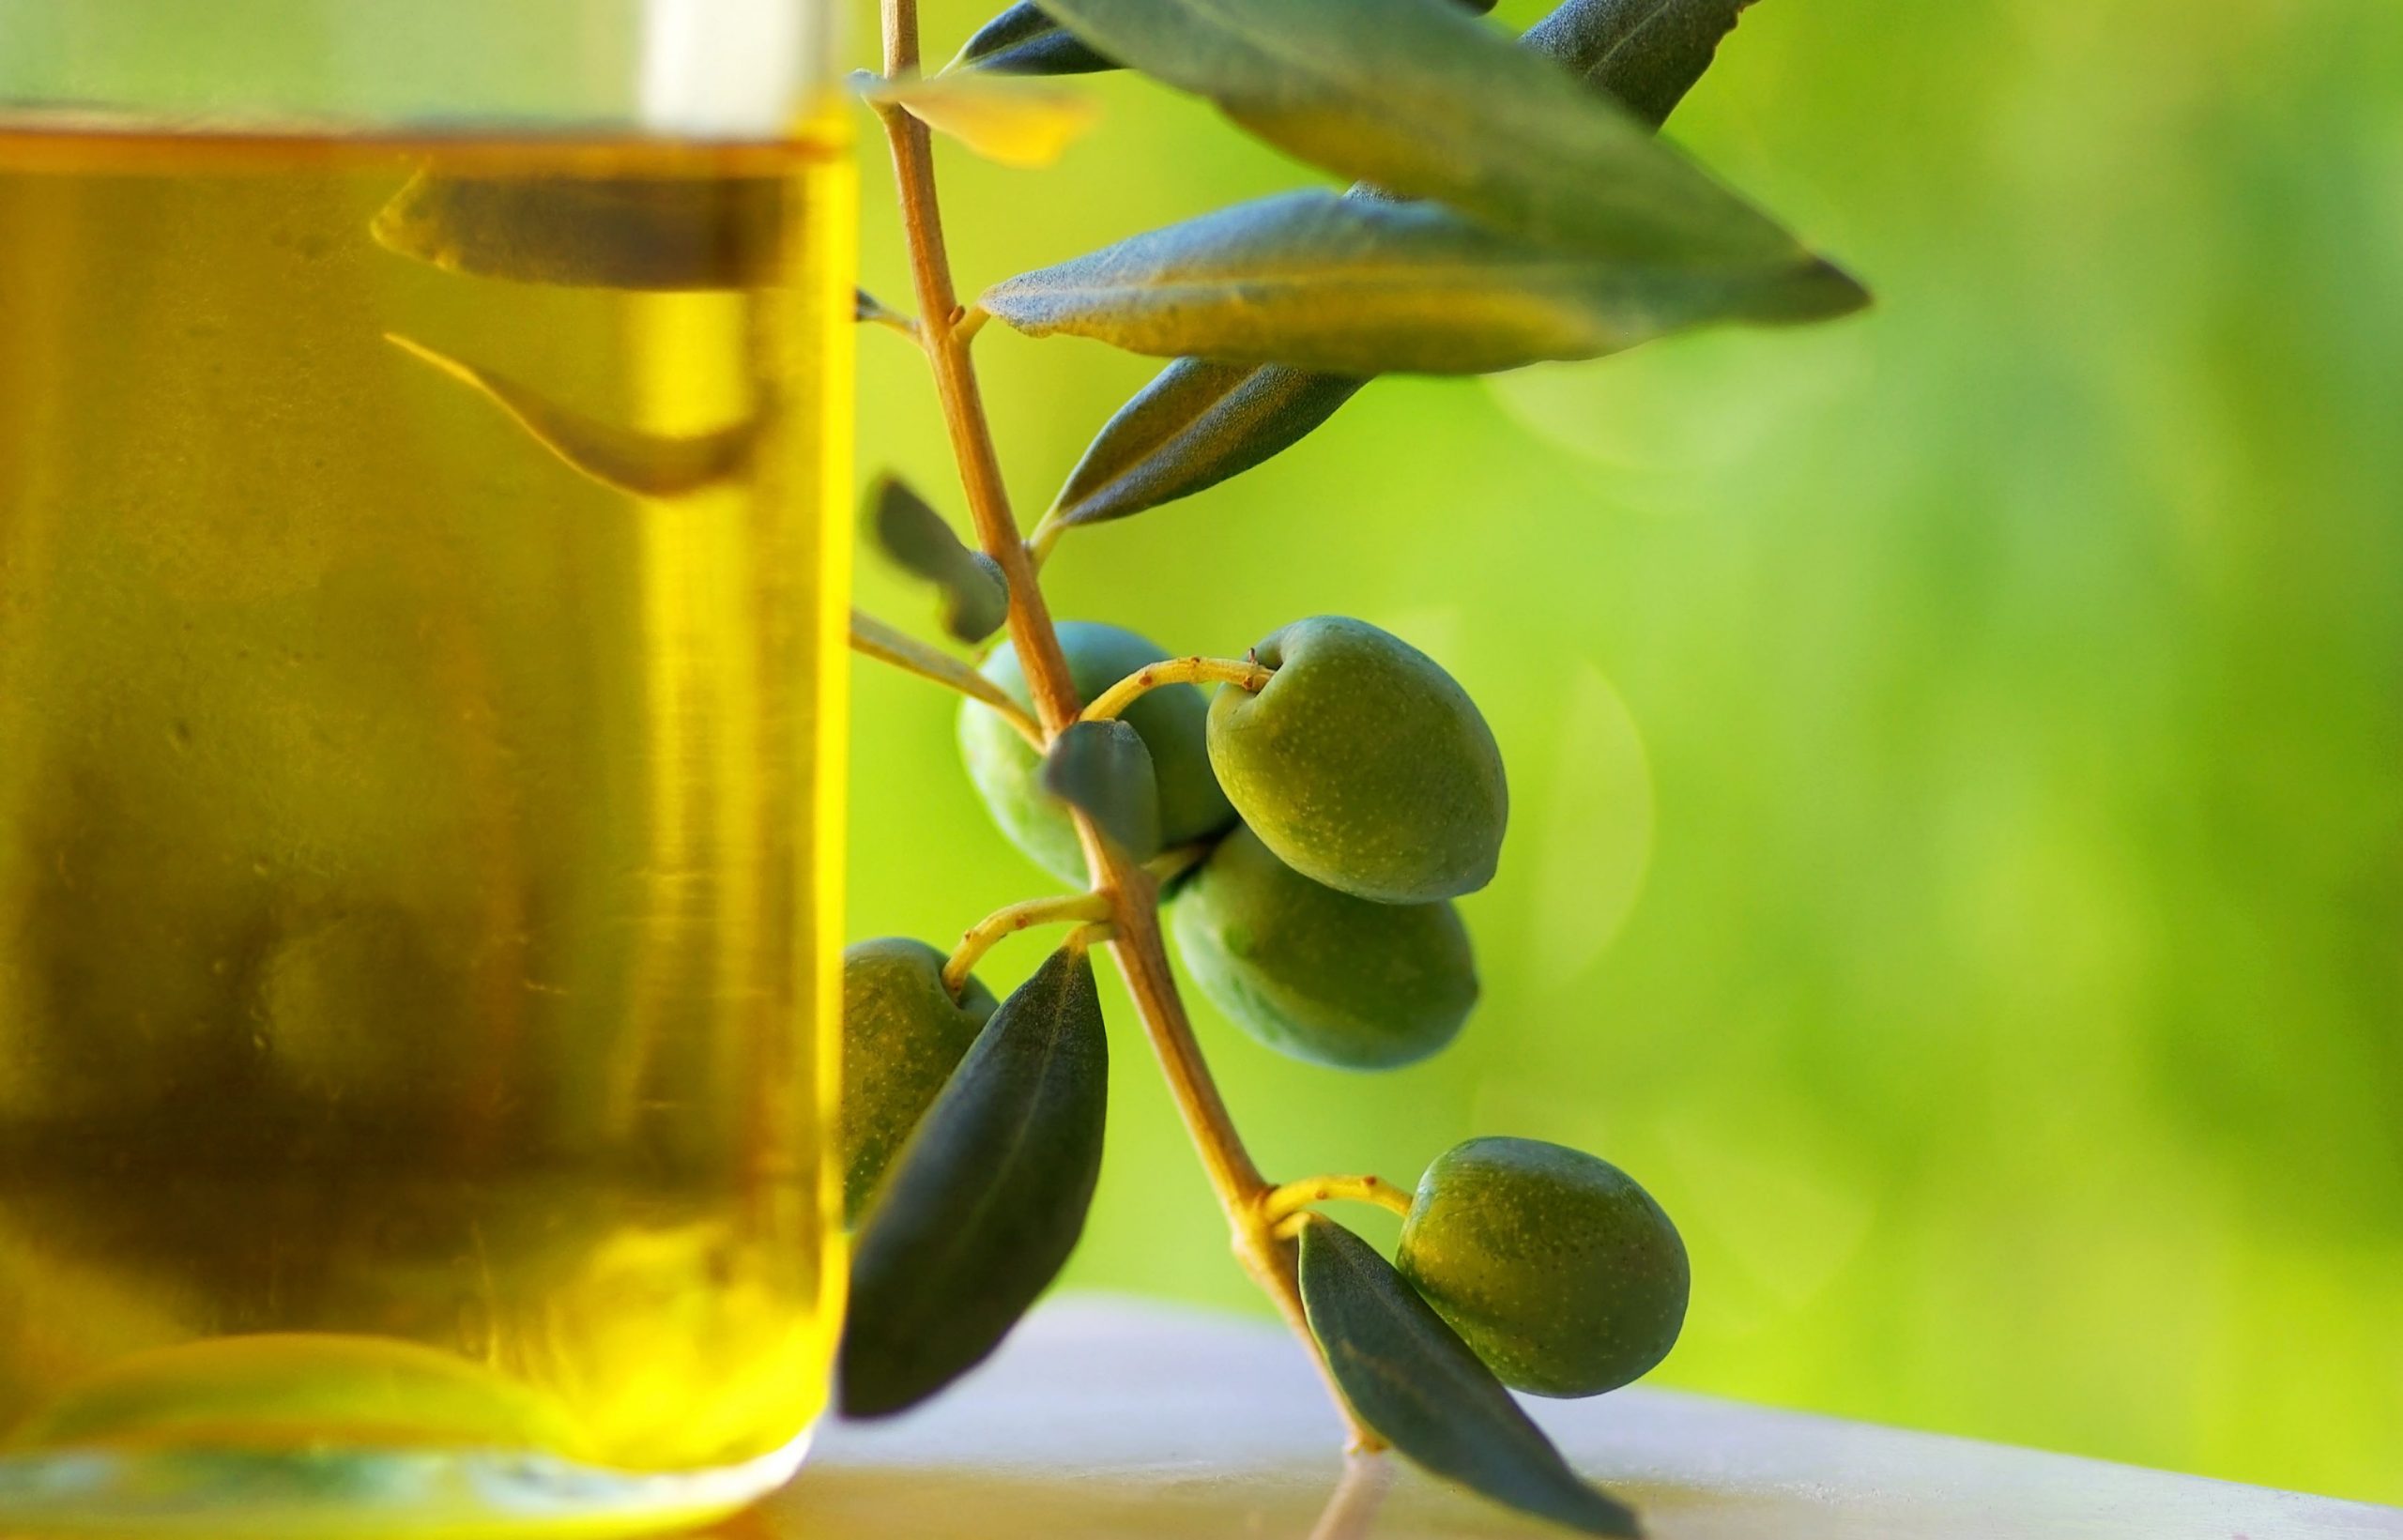 Hellenic Food Authority (EFET): Irregularity Found in 15% of Olive Oils